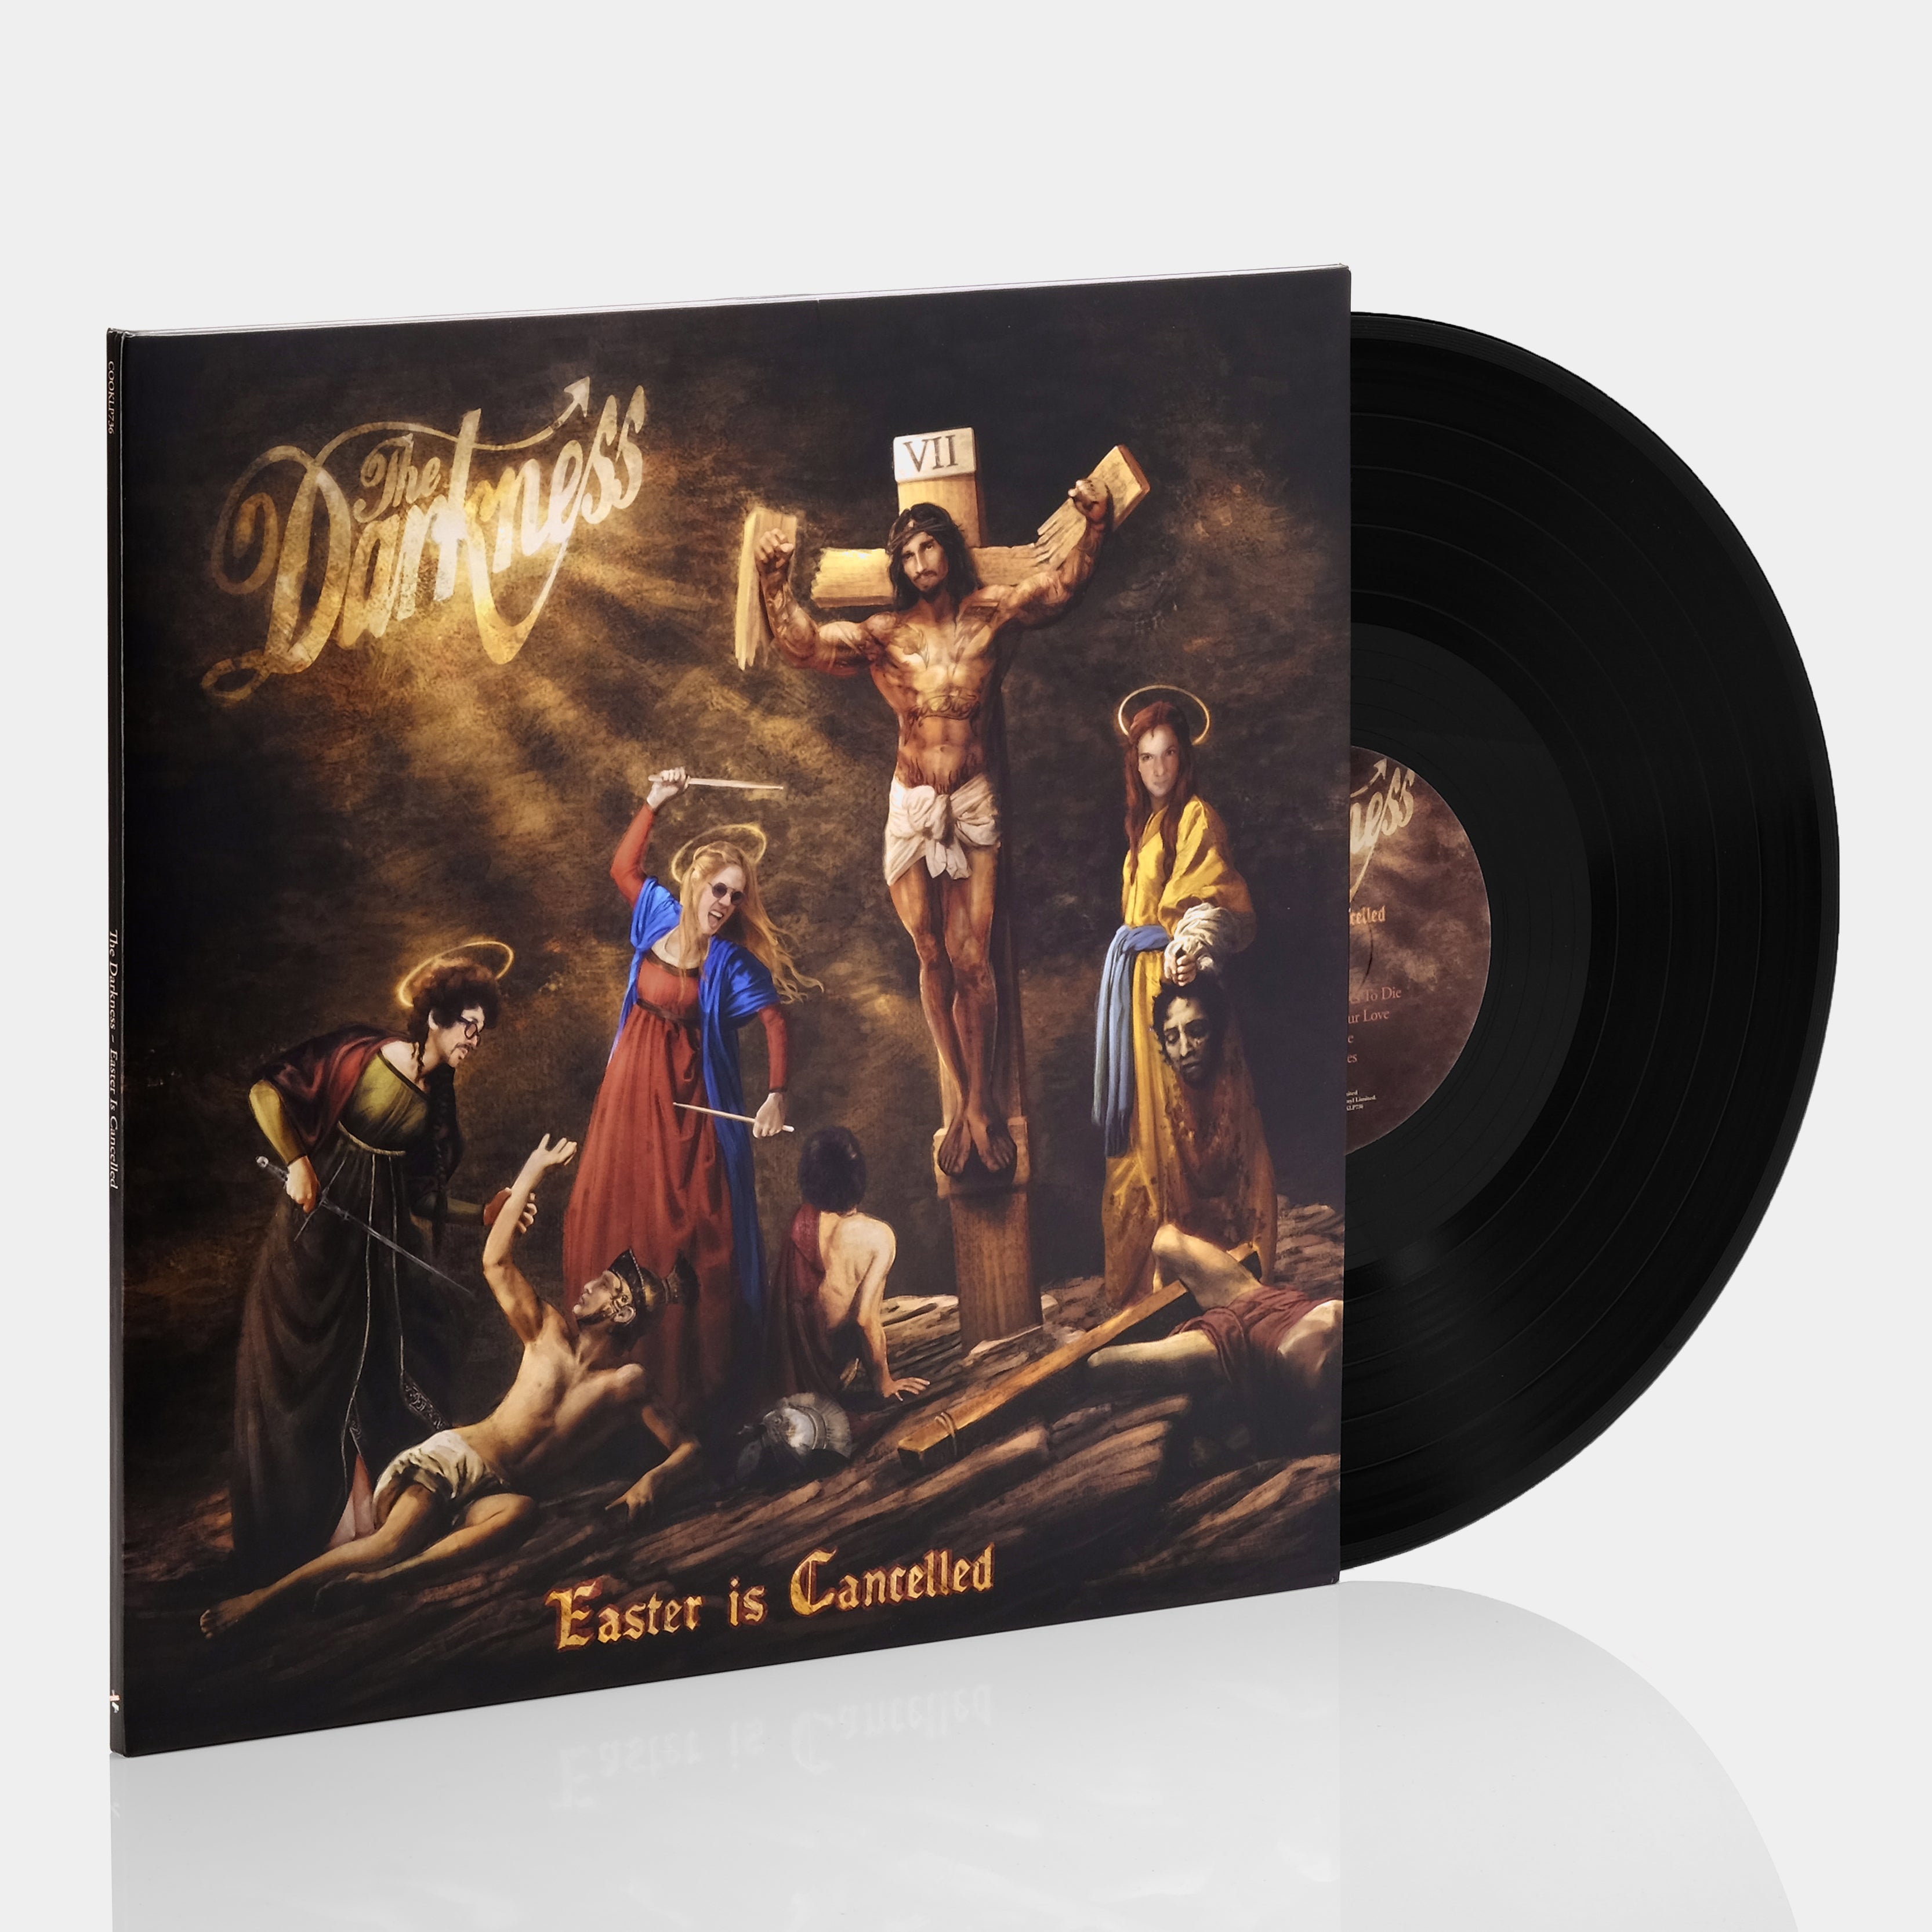 The Darkness - Easter Is Cancelled LP Vinyl Record